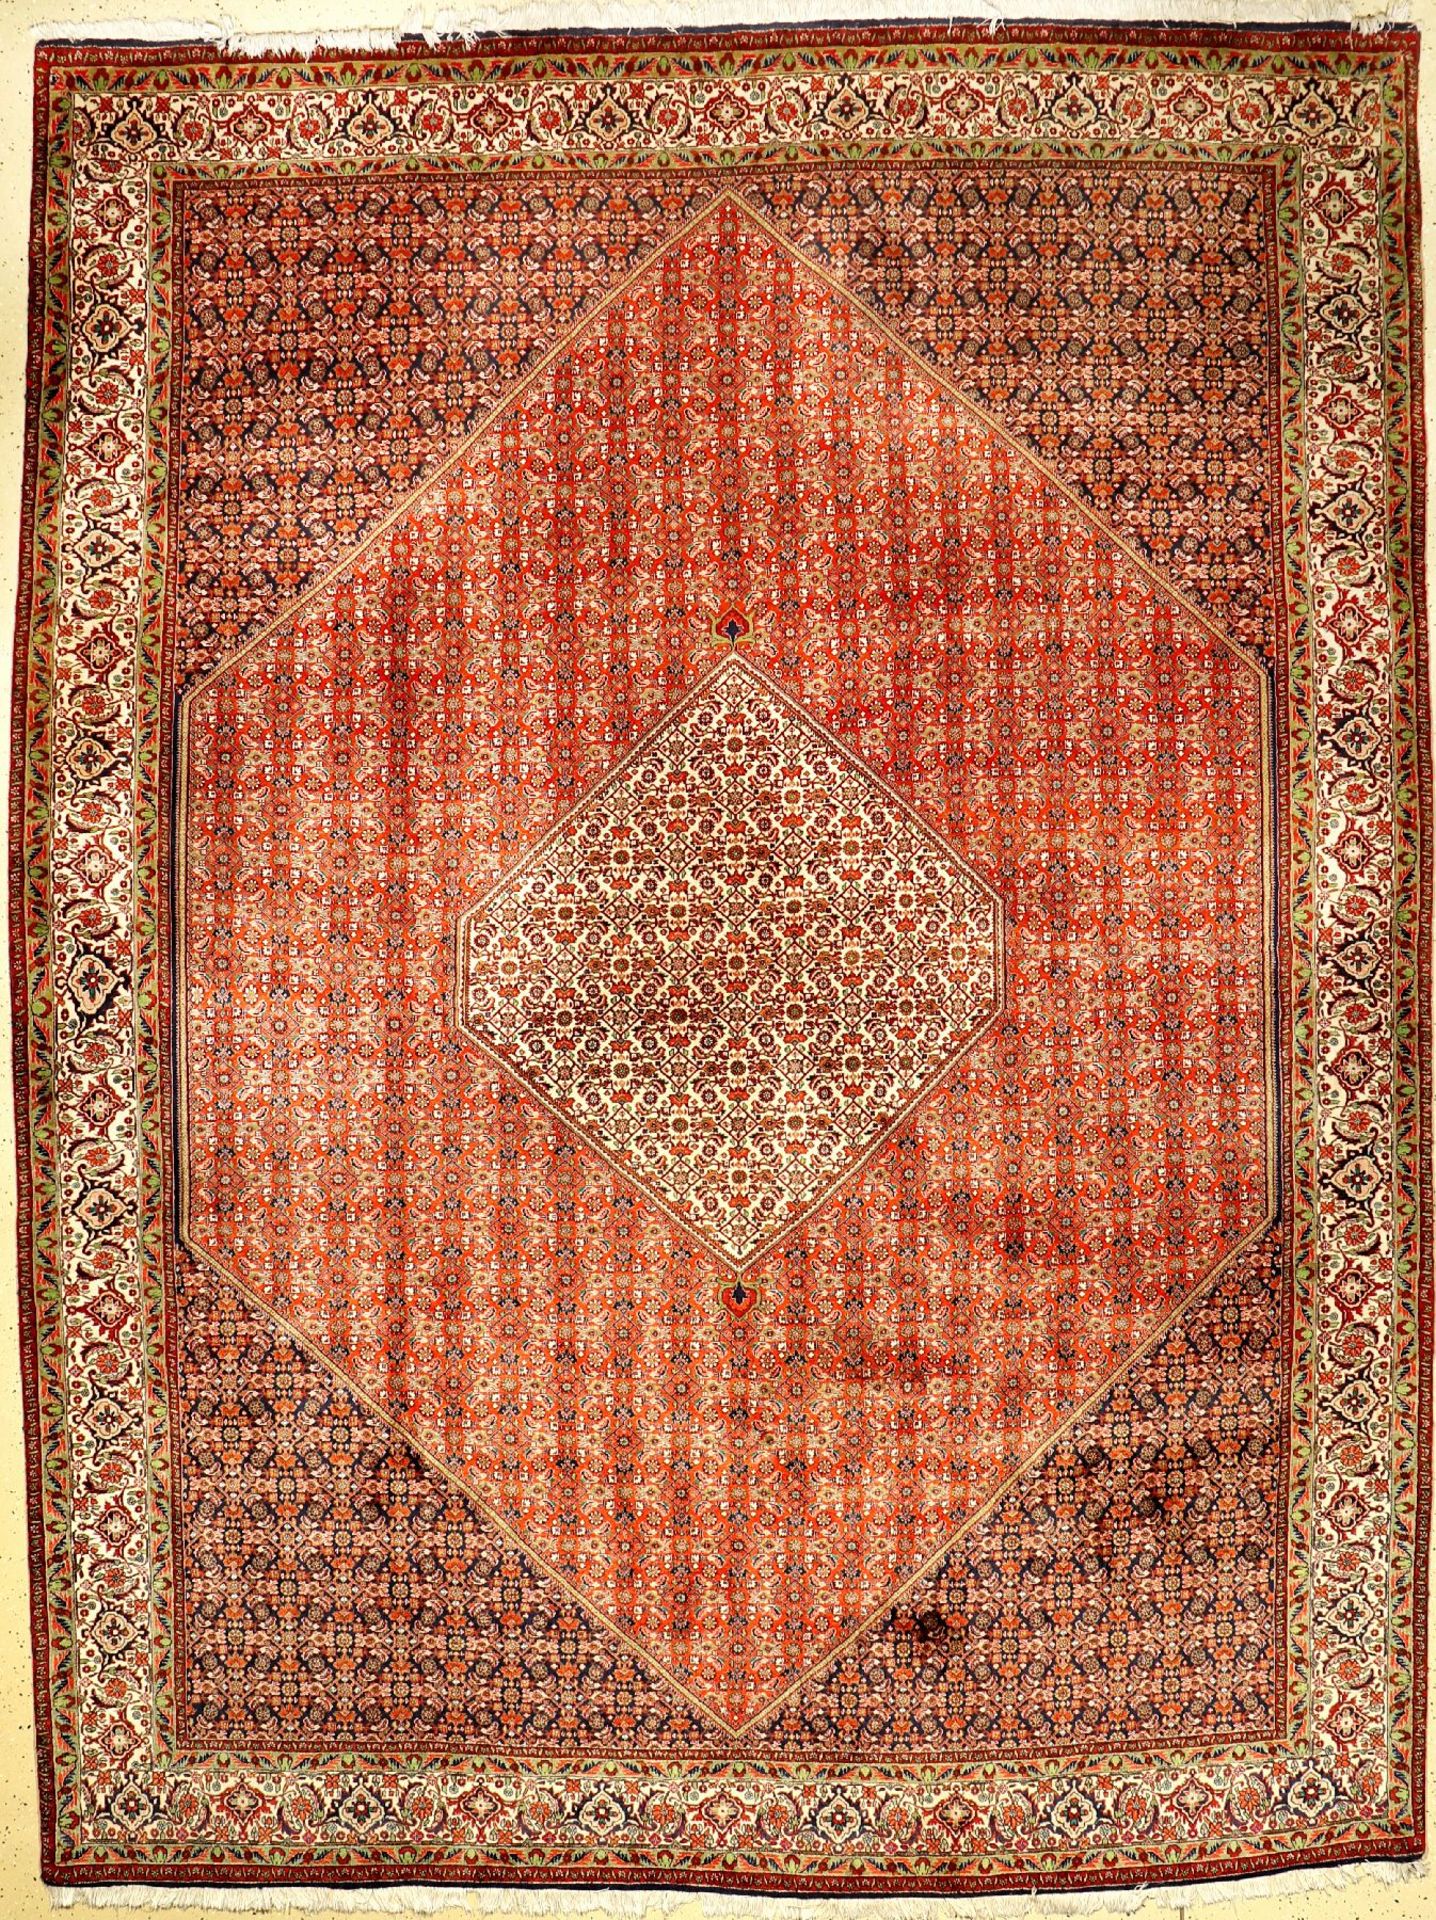 Bidjar fine, Persia, approx. 40 years, wool, approx. 341 x 258 cm, condition: 2. Auction: Antique,